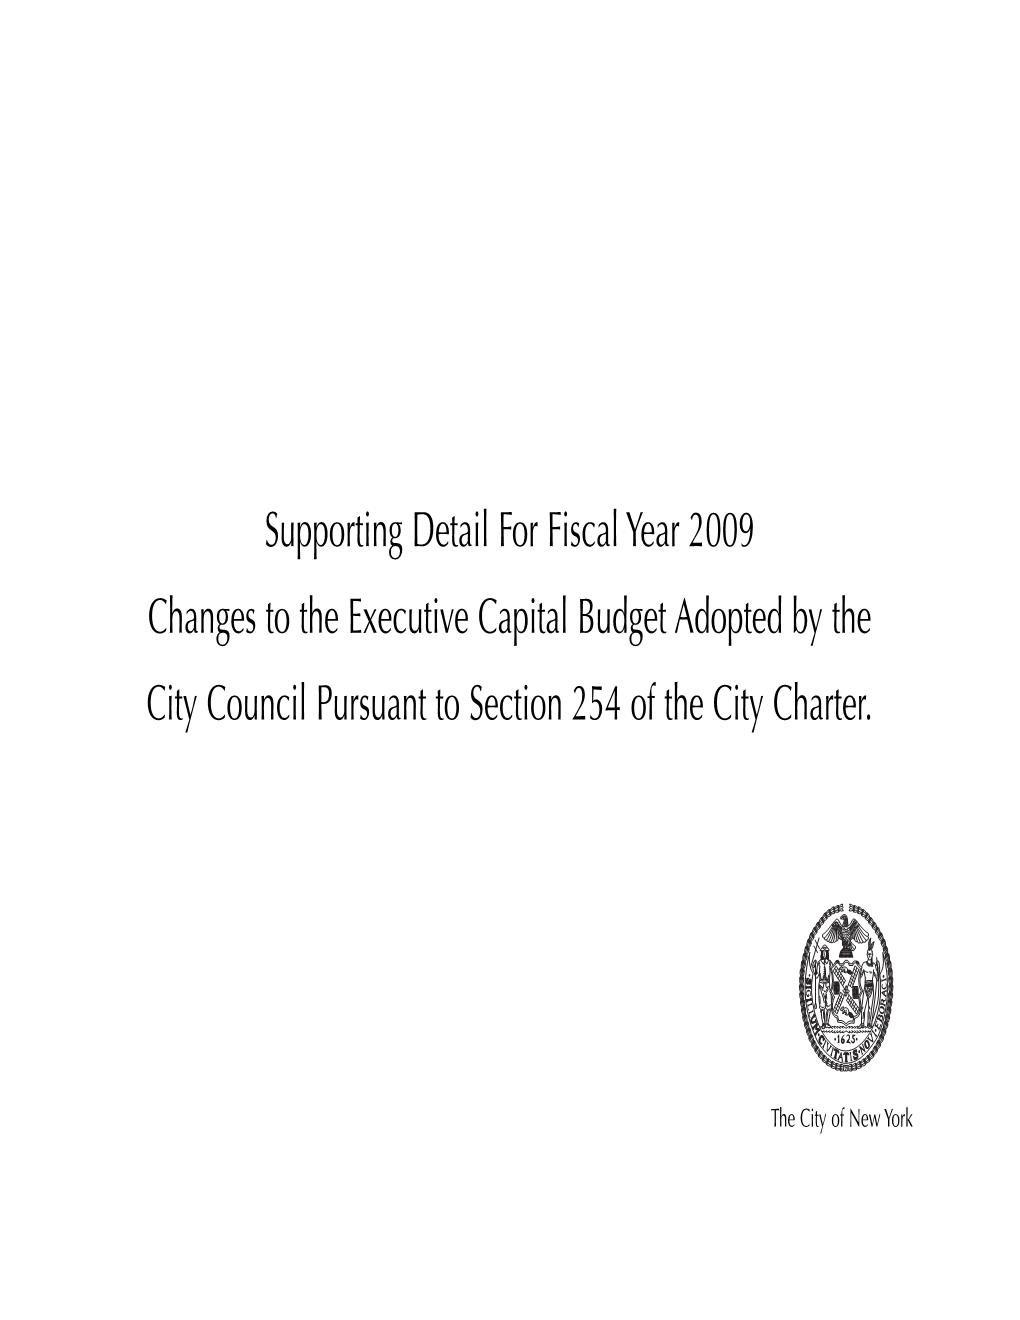 Supporting Detail for Fiscal Year 2009 Changes to the Executive Capital Budget Adopted by the City Council Pursuant to Section 254 of the City Charter